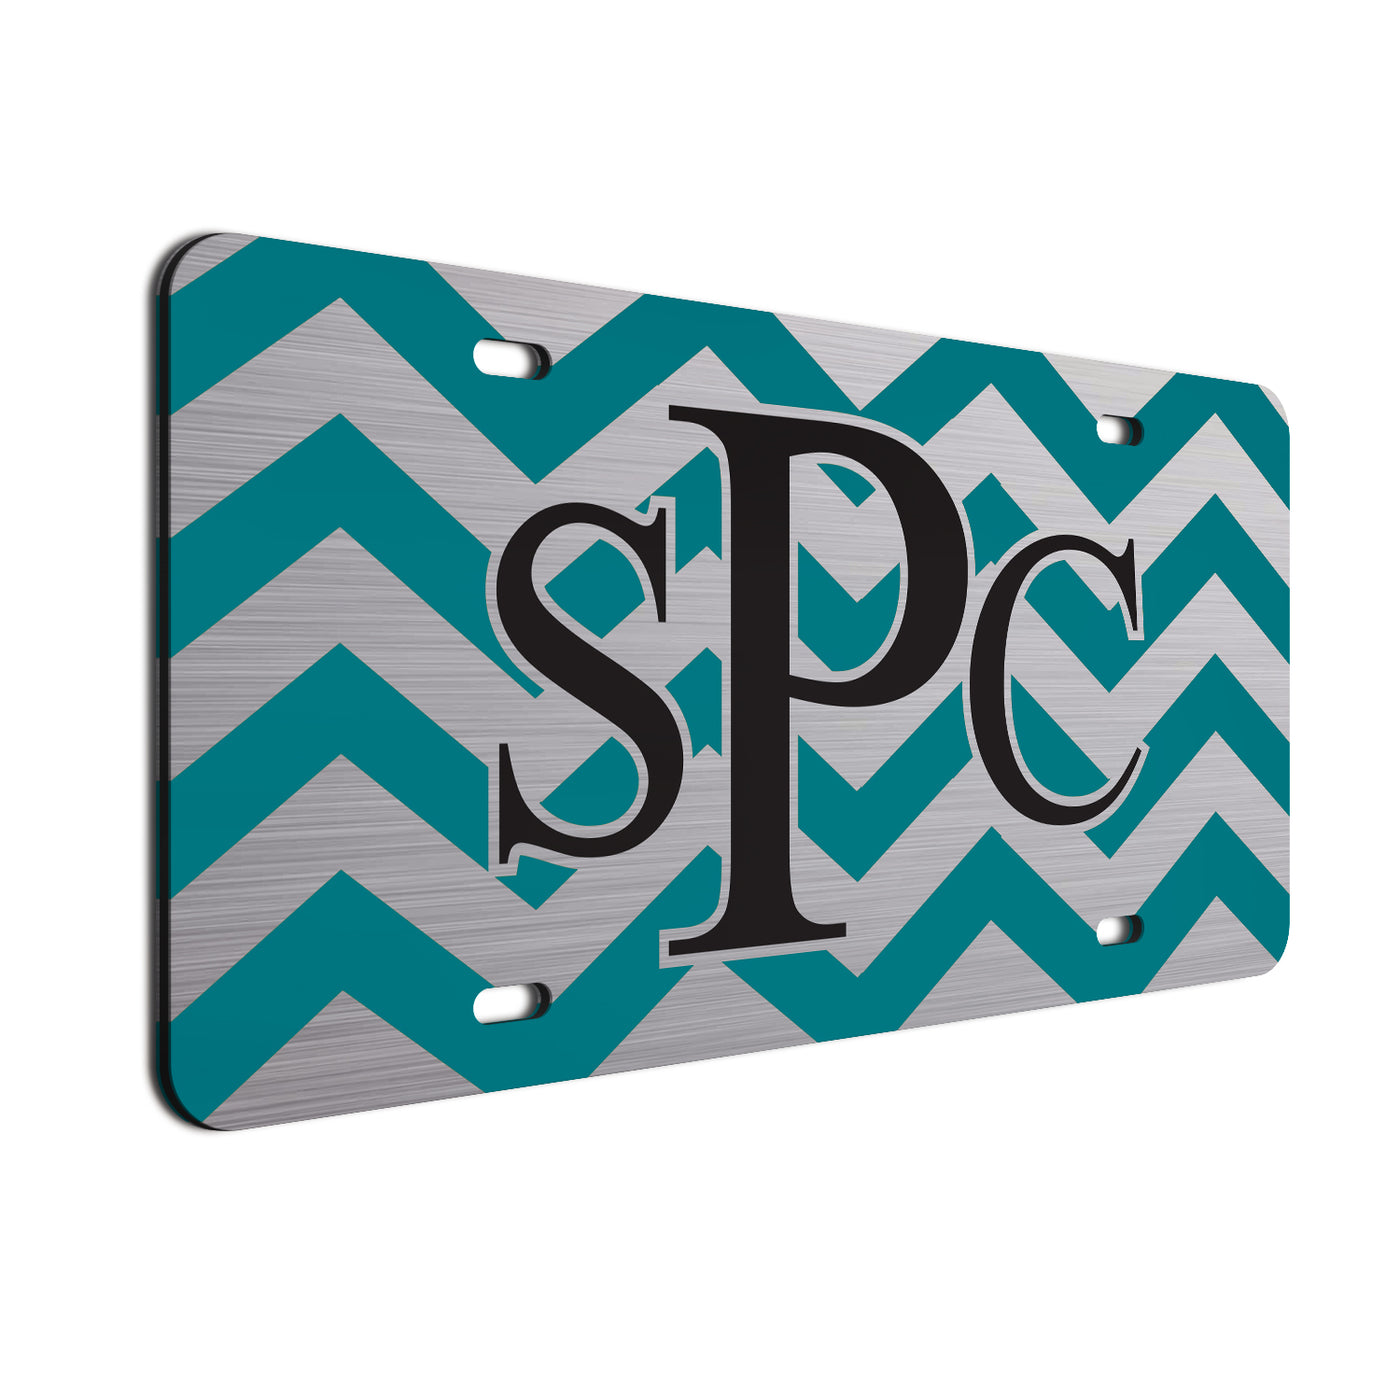 Chevron Bold Text License Plate Teal